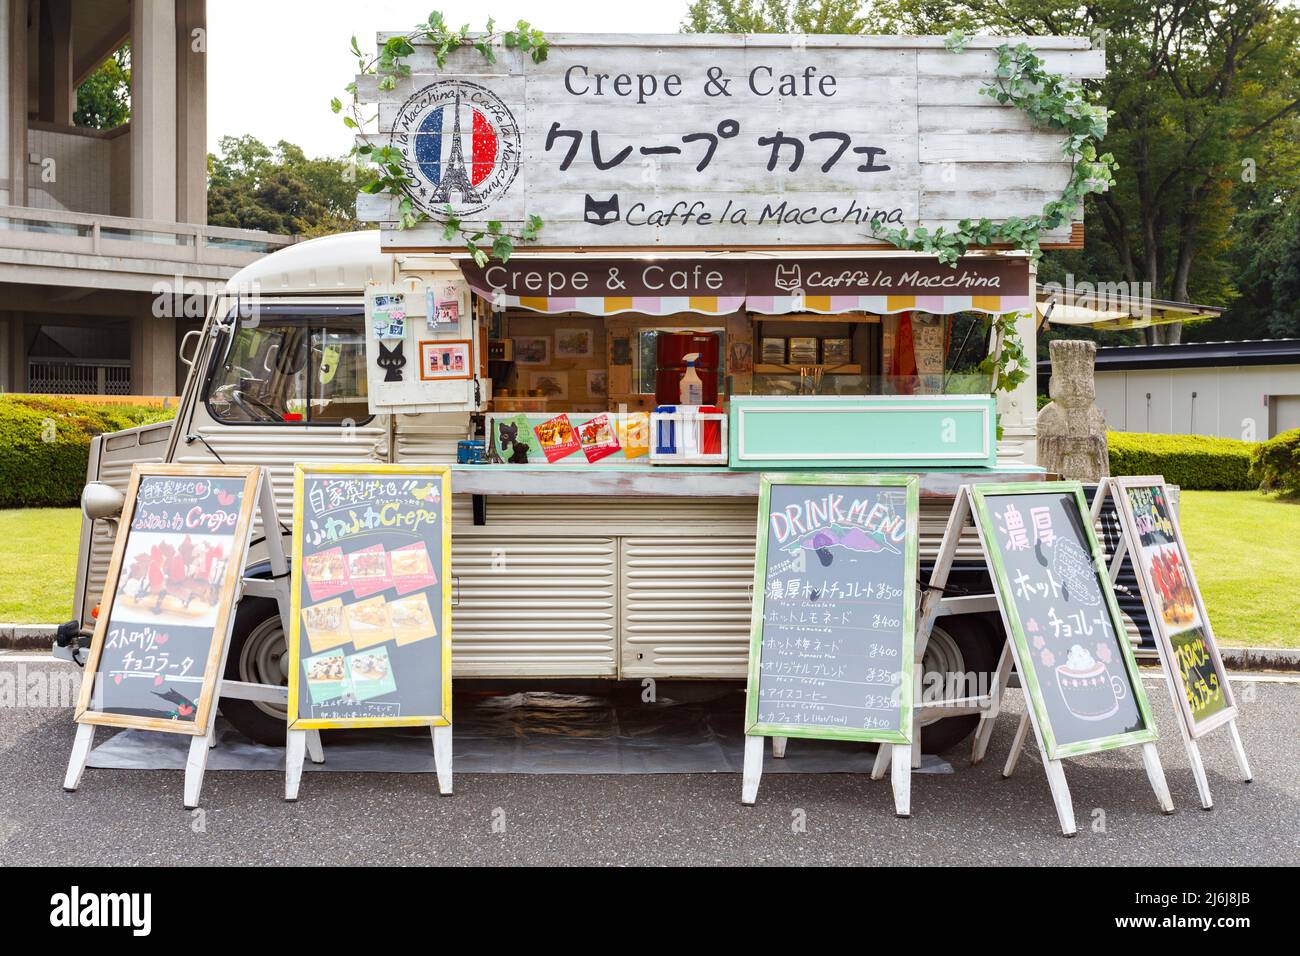 Tokyo, Japan - April 23, 2020 : small japanese business food truck selling sweet dessert crepe and coffee in the park at Tokyo festival market. Stock Photo